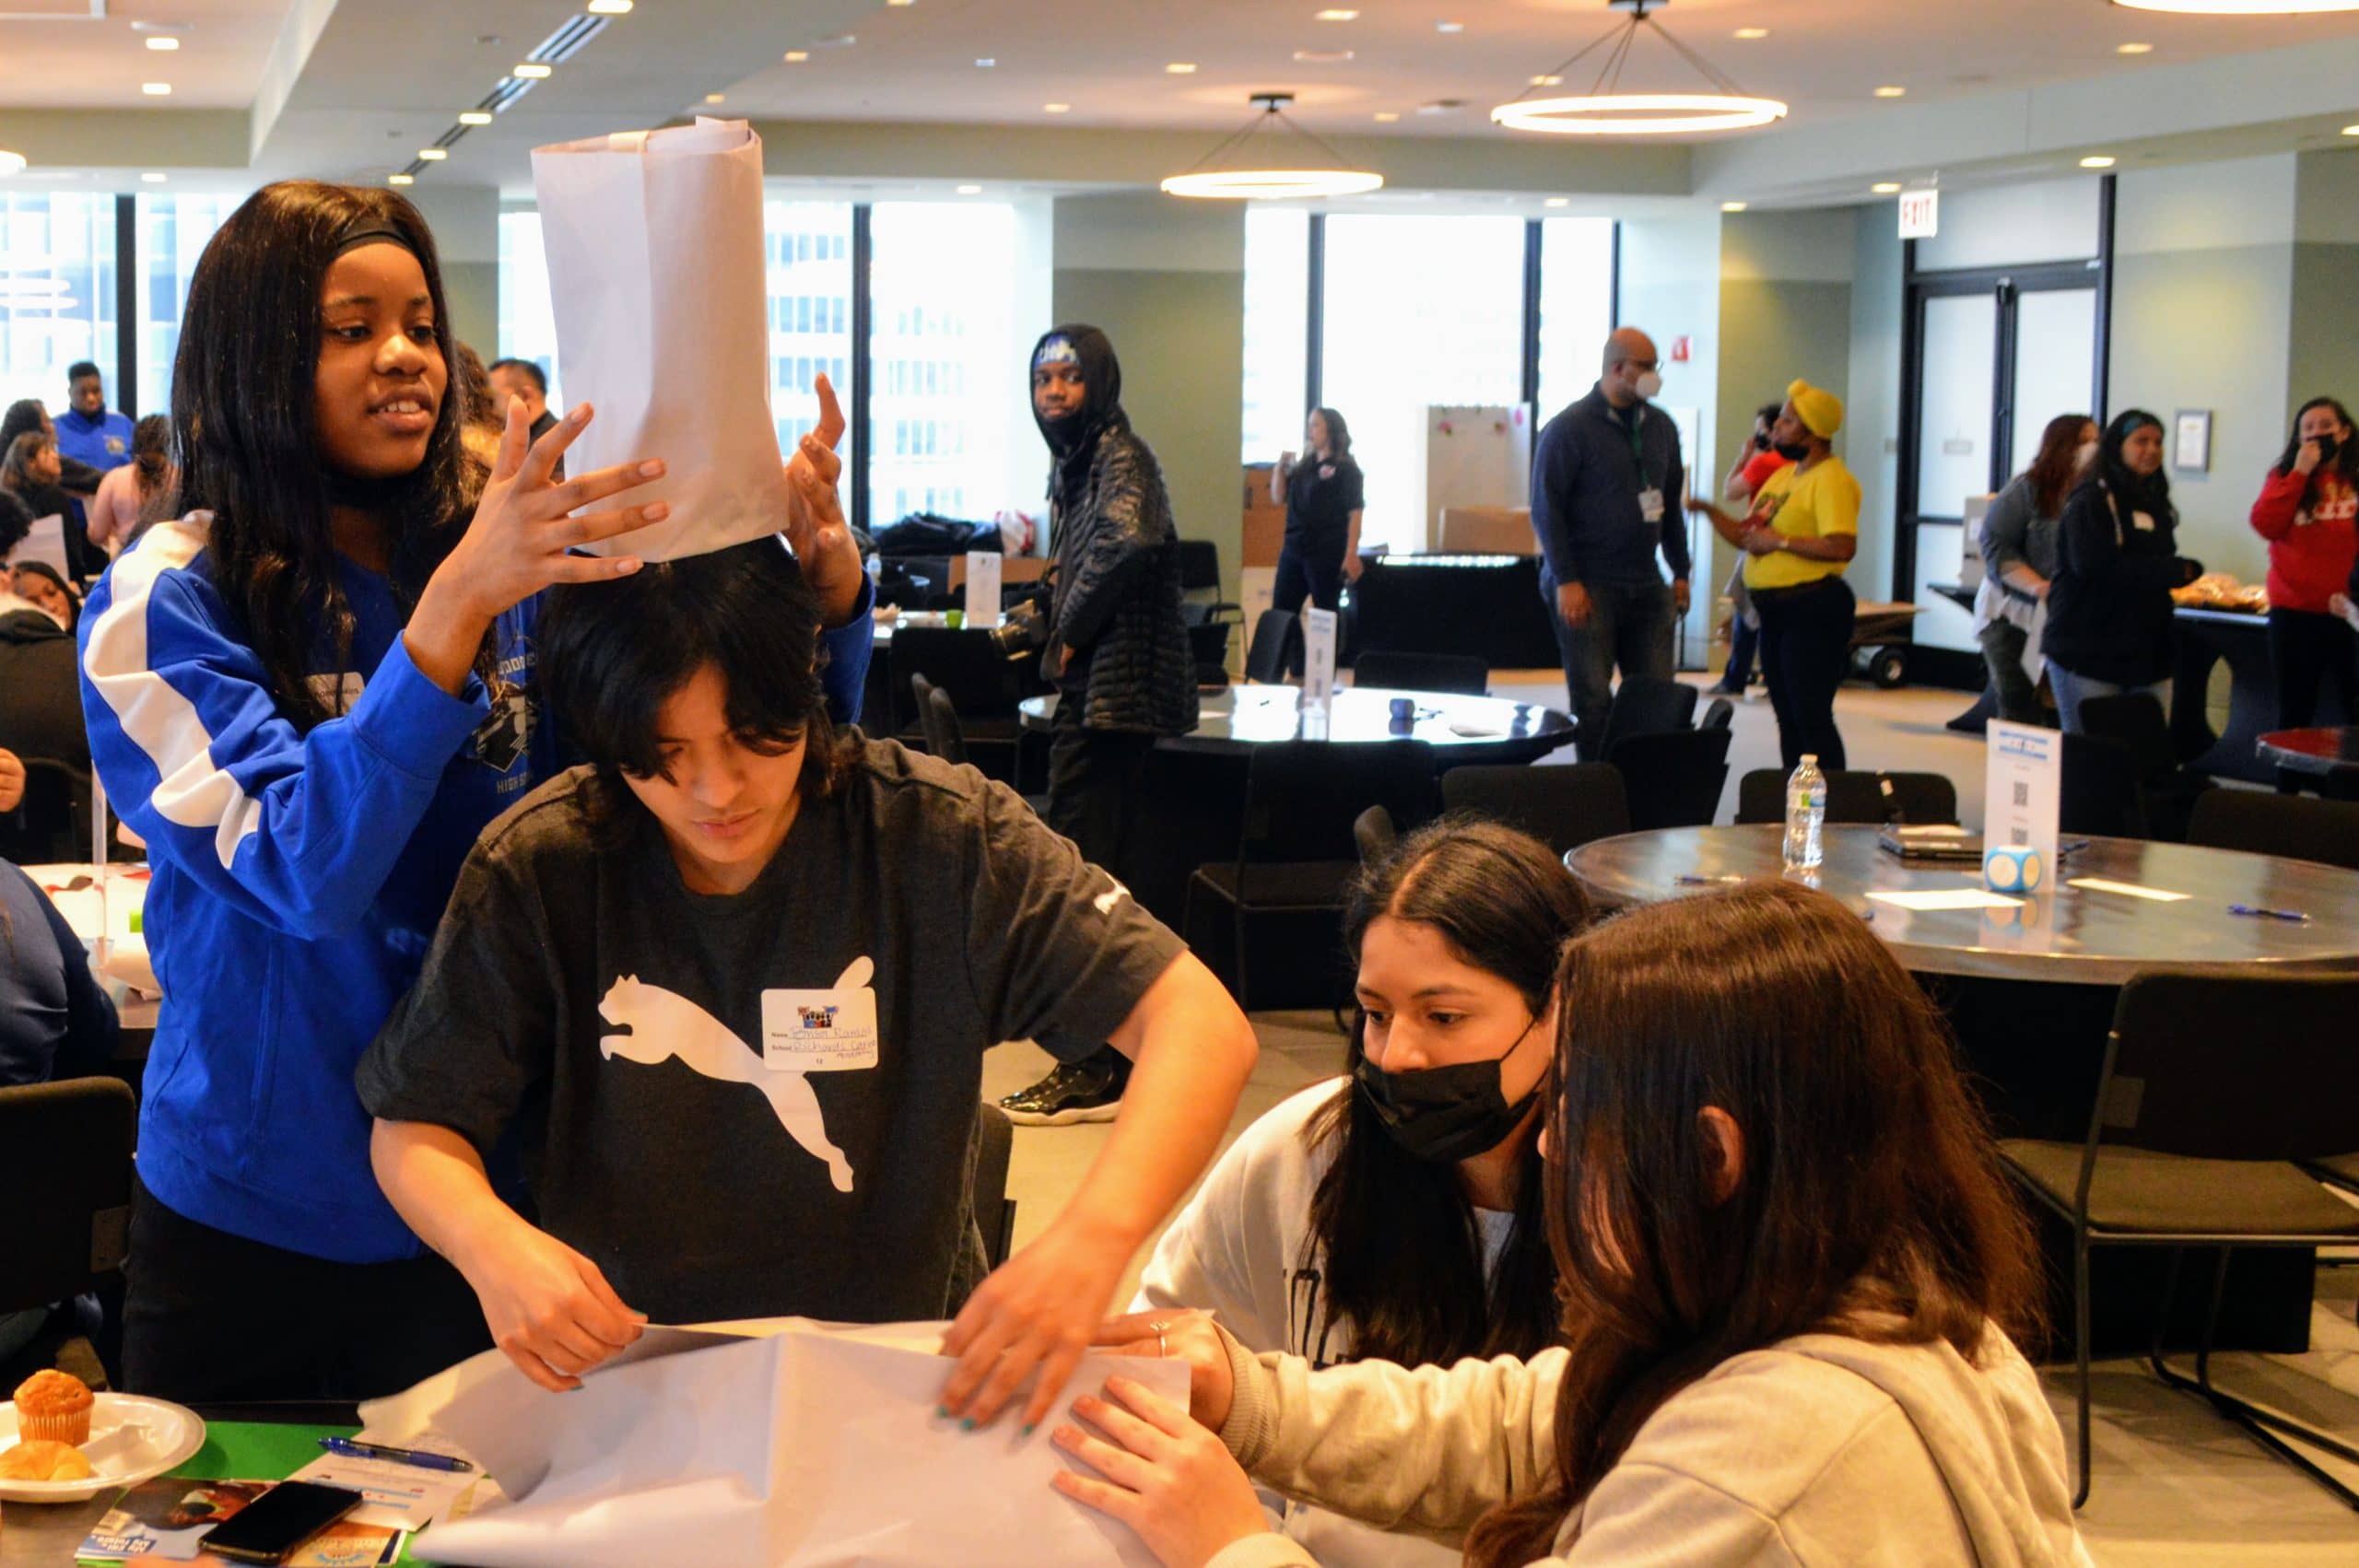 Students bonded through a “tallest hat” competition led by Embarc Chicago